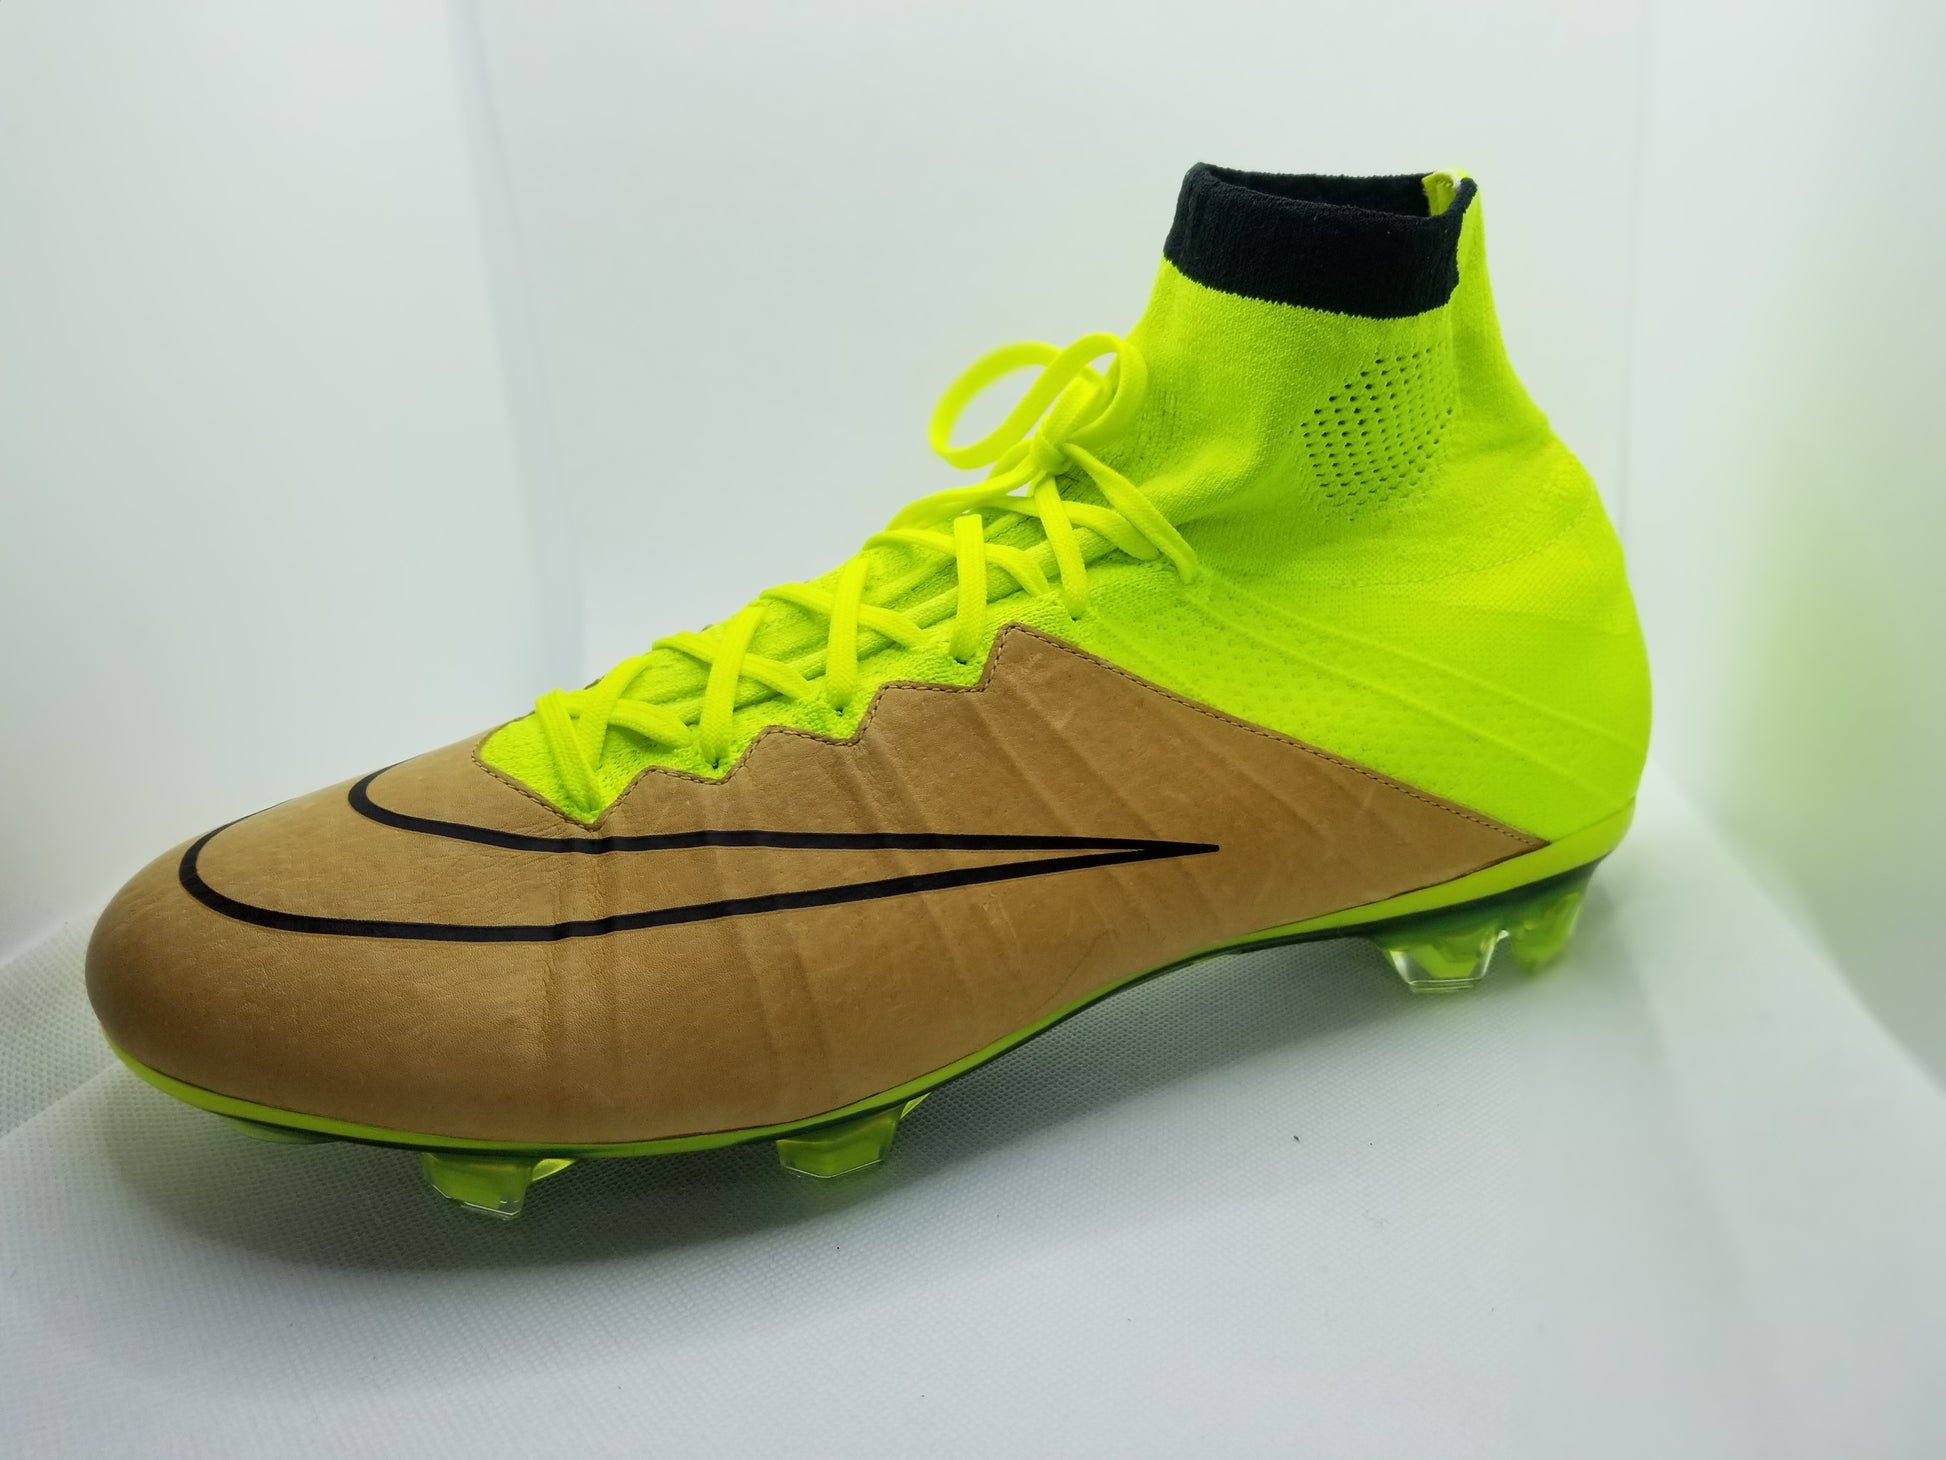 Nike Superfly 4 'Tech Craft' FG – Boots